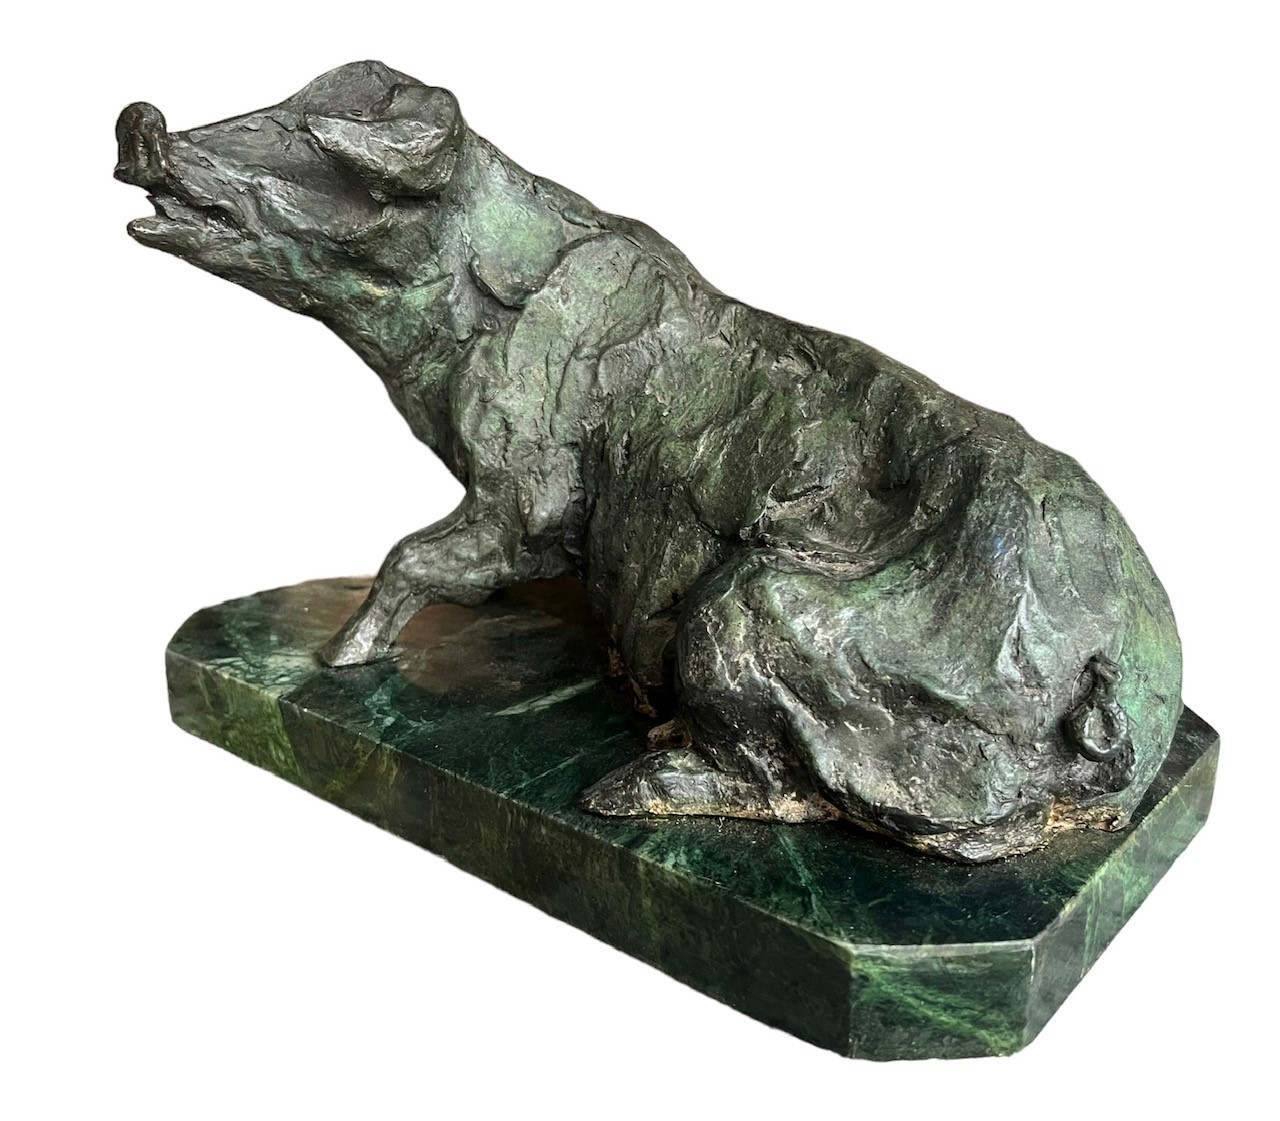 A DECORATIVE 20TH CENTURY BRONZE SCULPTURE OF A SEATED PIG Raised on a marble plinth base, - Image 3 of 8